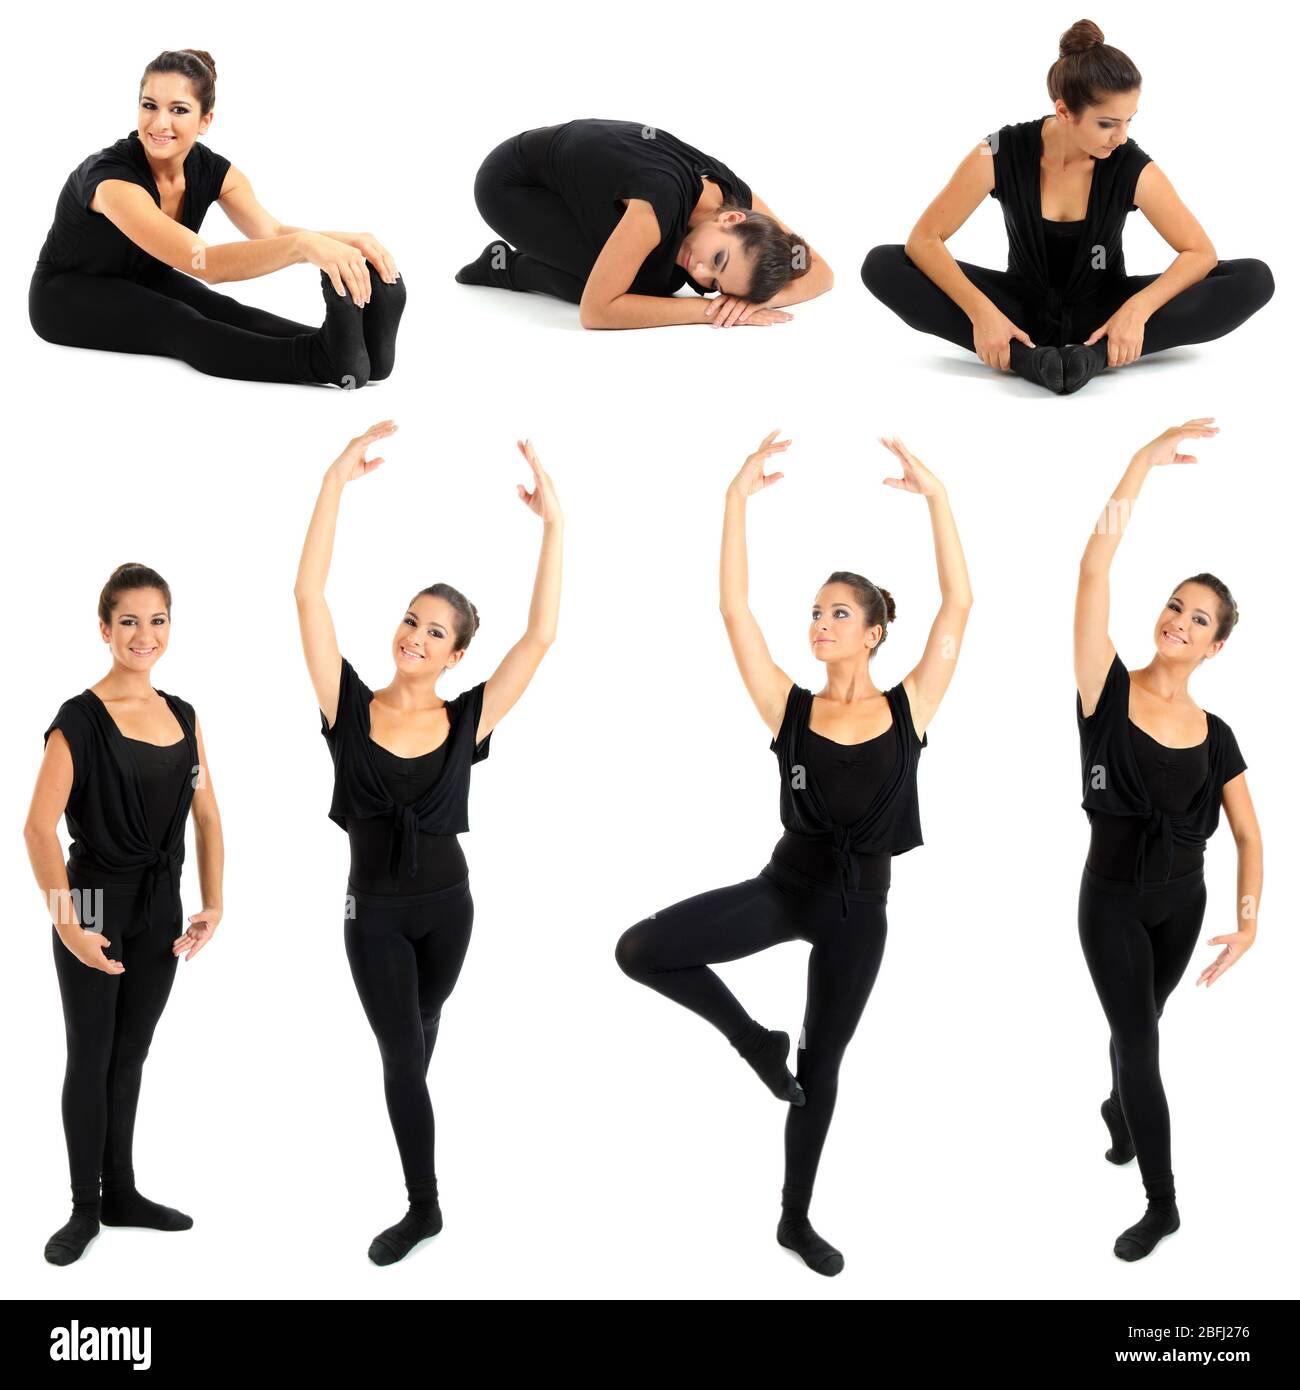 https://c8.alamy.com/comp/2BFJ276/young-woman-doing-ballet-stretching-warm-up-exercise-isolated-on-white-2BFJ276.jpg